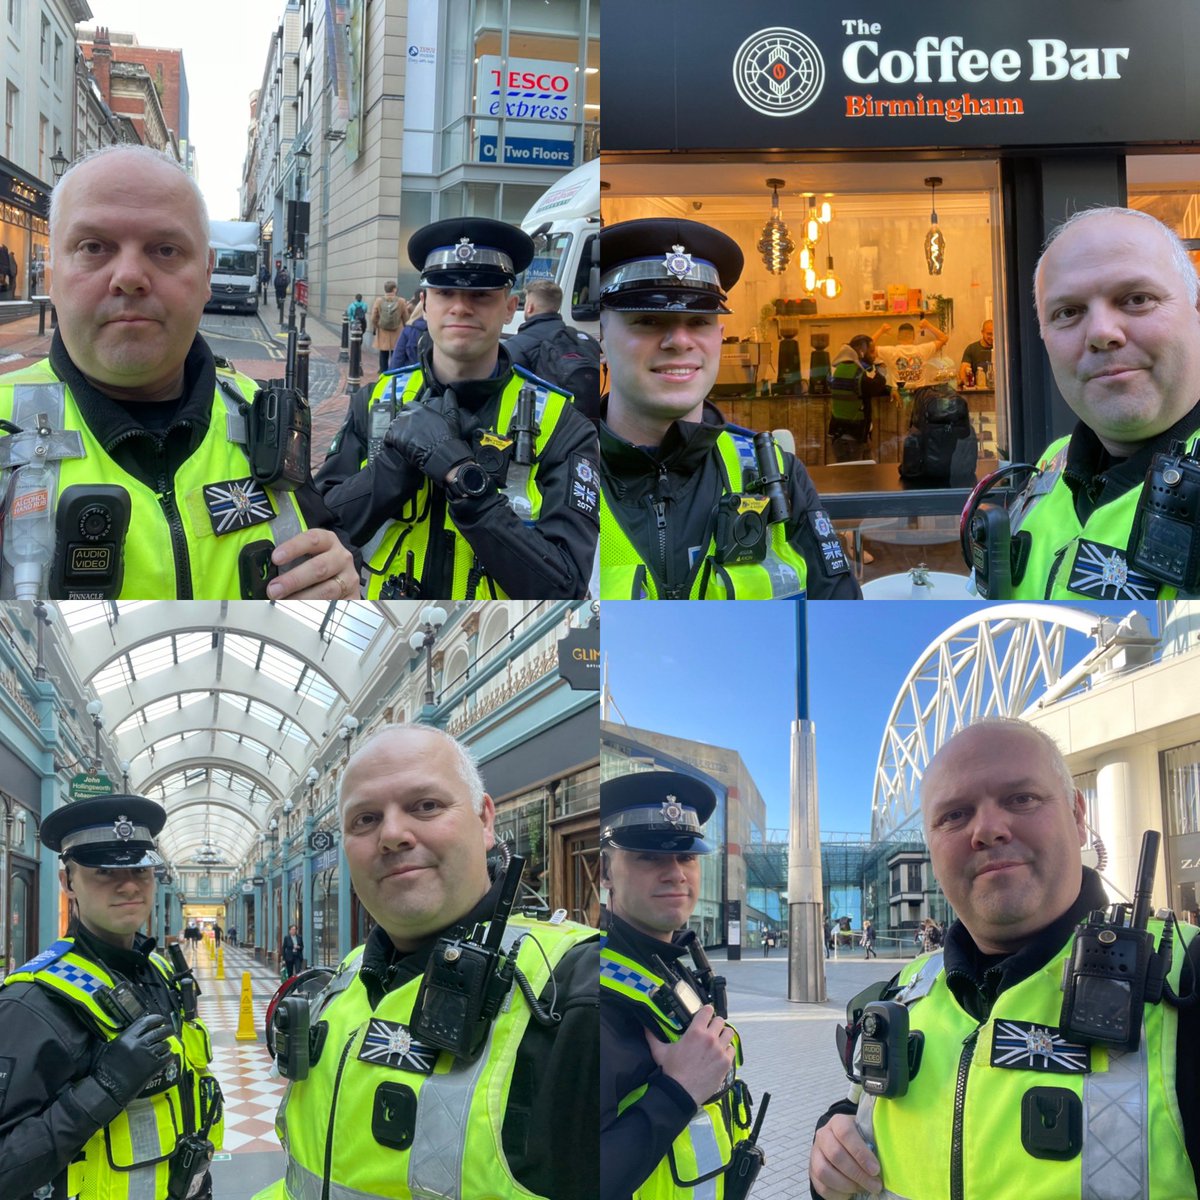 Some joint hi vis patrols throughout @RetailBID patch today with our colleagues @BTPBhm ensuring a nice warm welcome to the business and visitors #oneteam #partnerships #safecleanandgreen #safercities